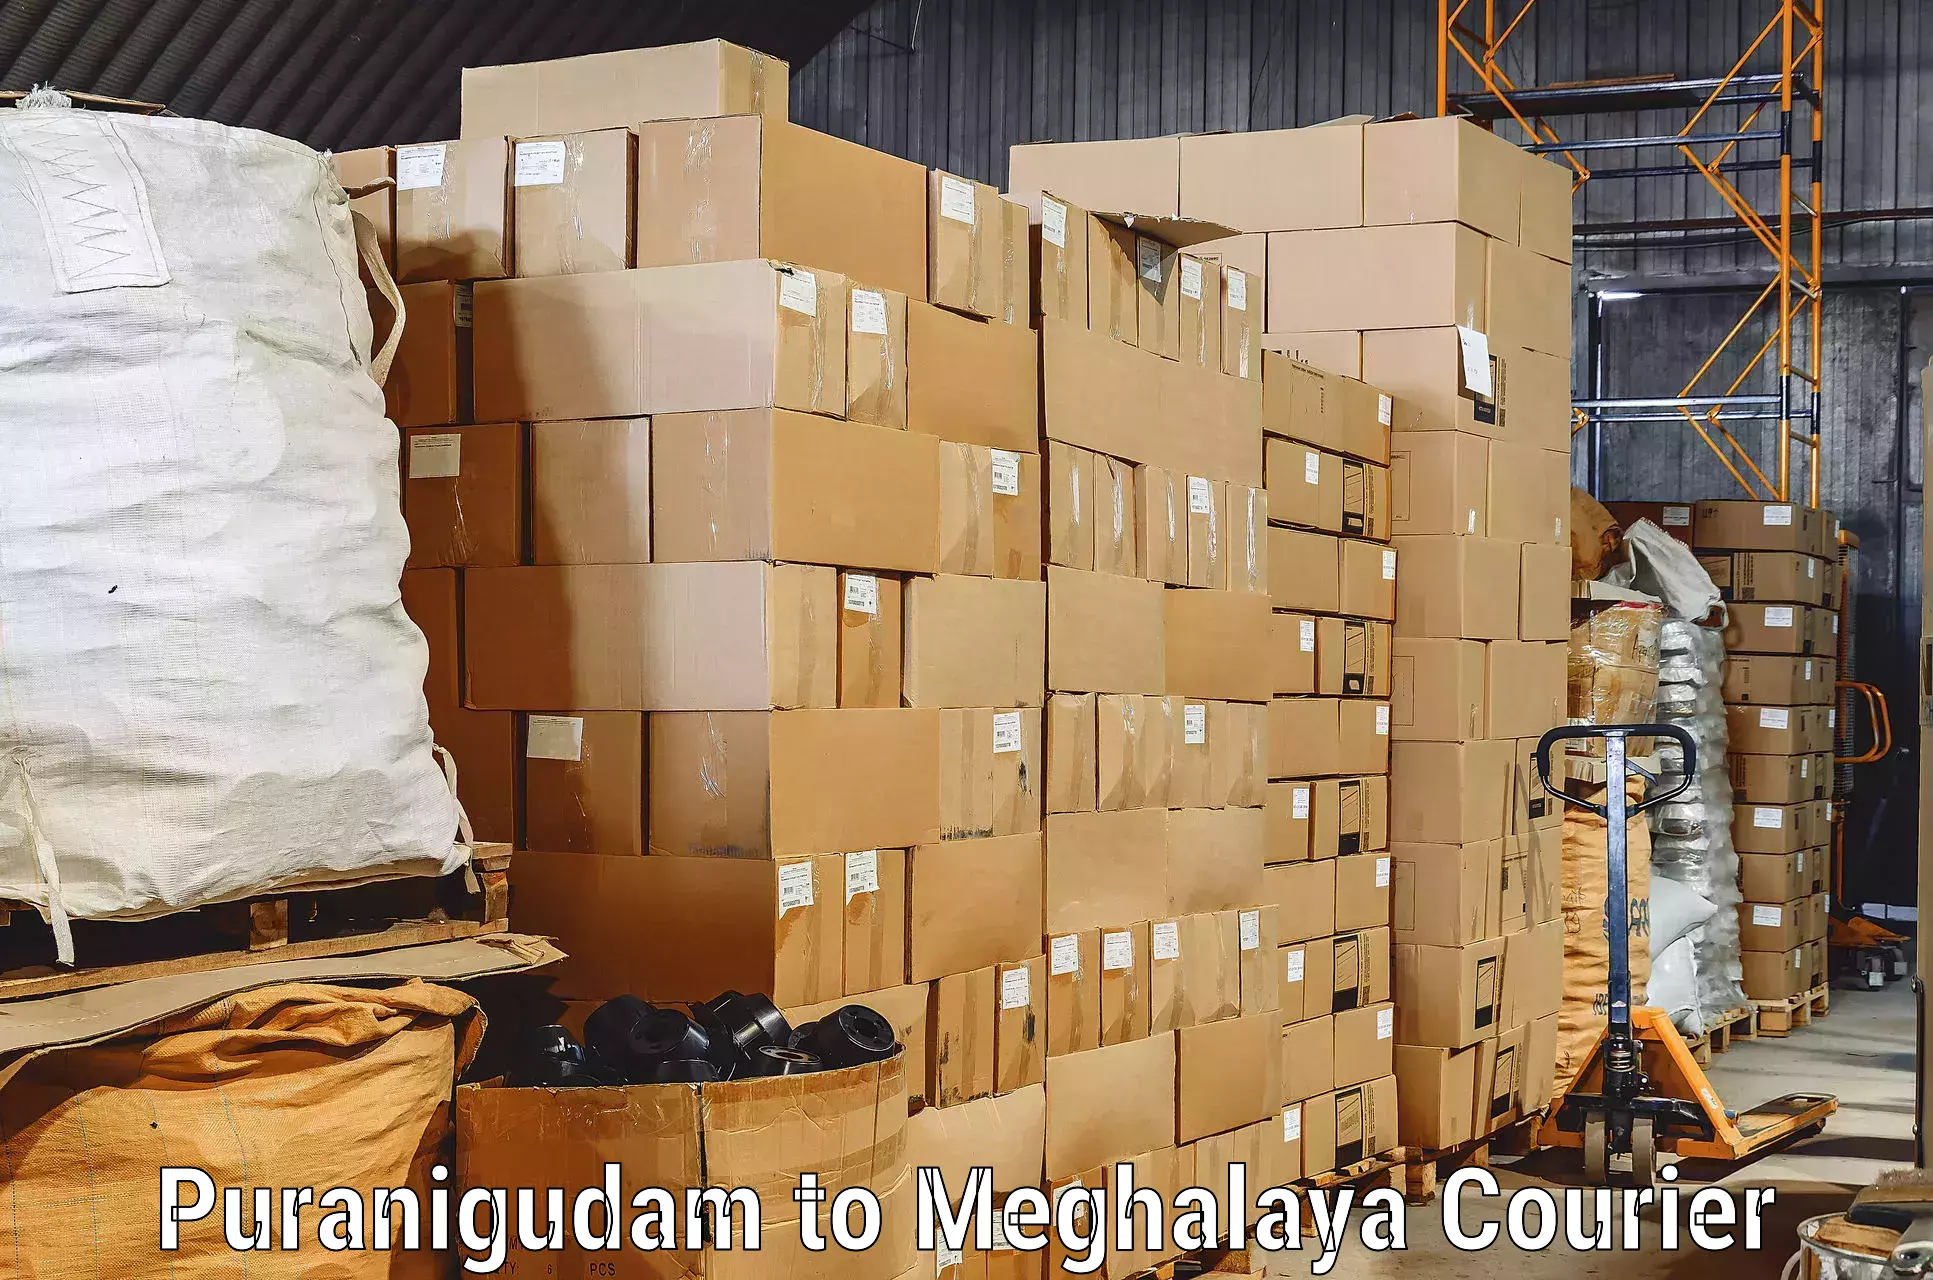 Reliable moving assistance in Puranigudam to Meghalaya